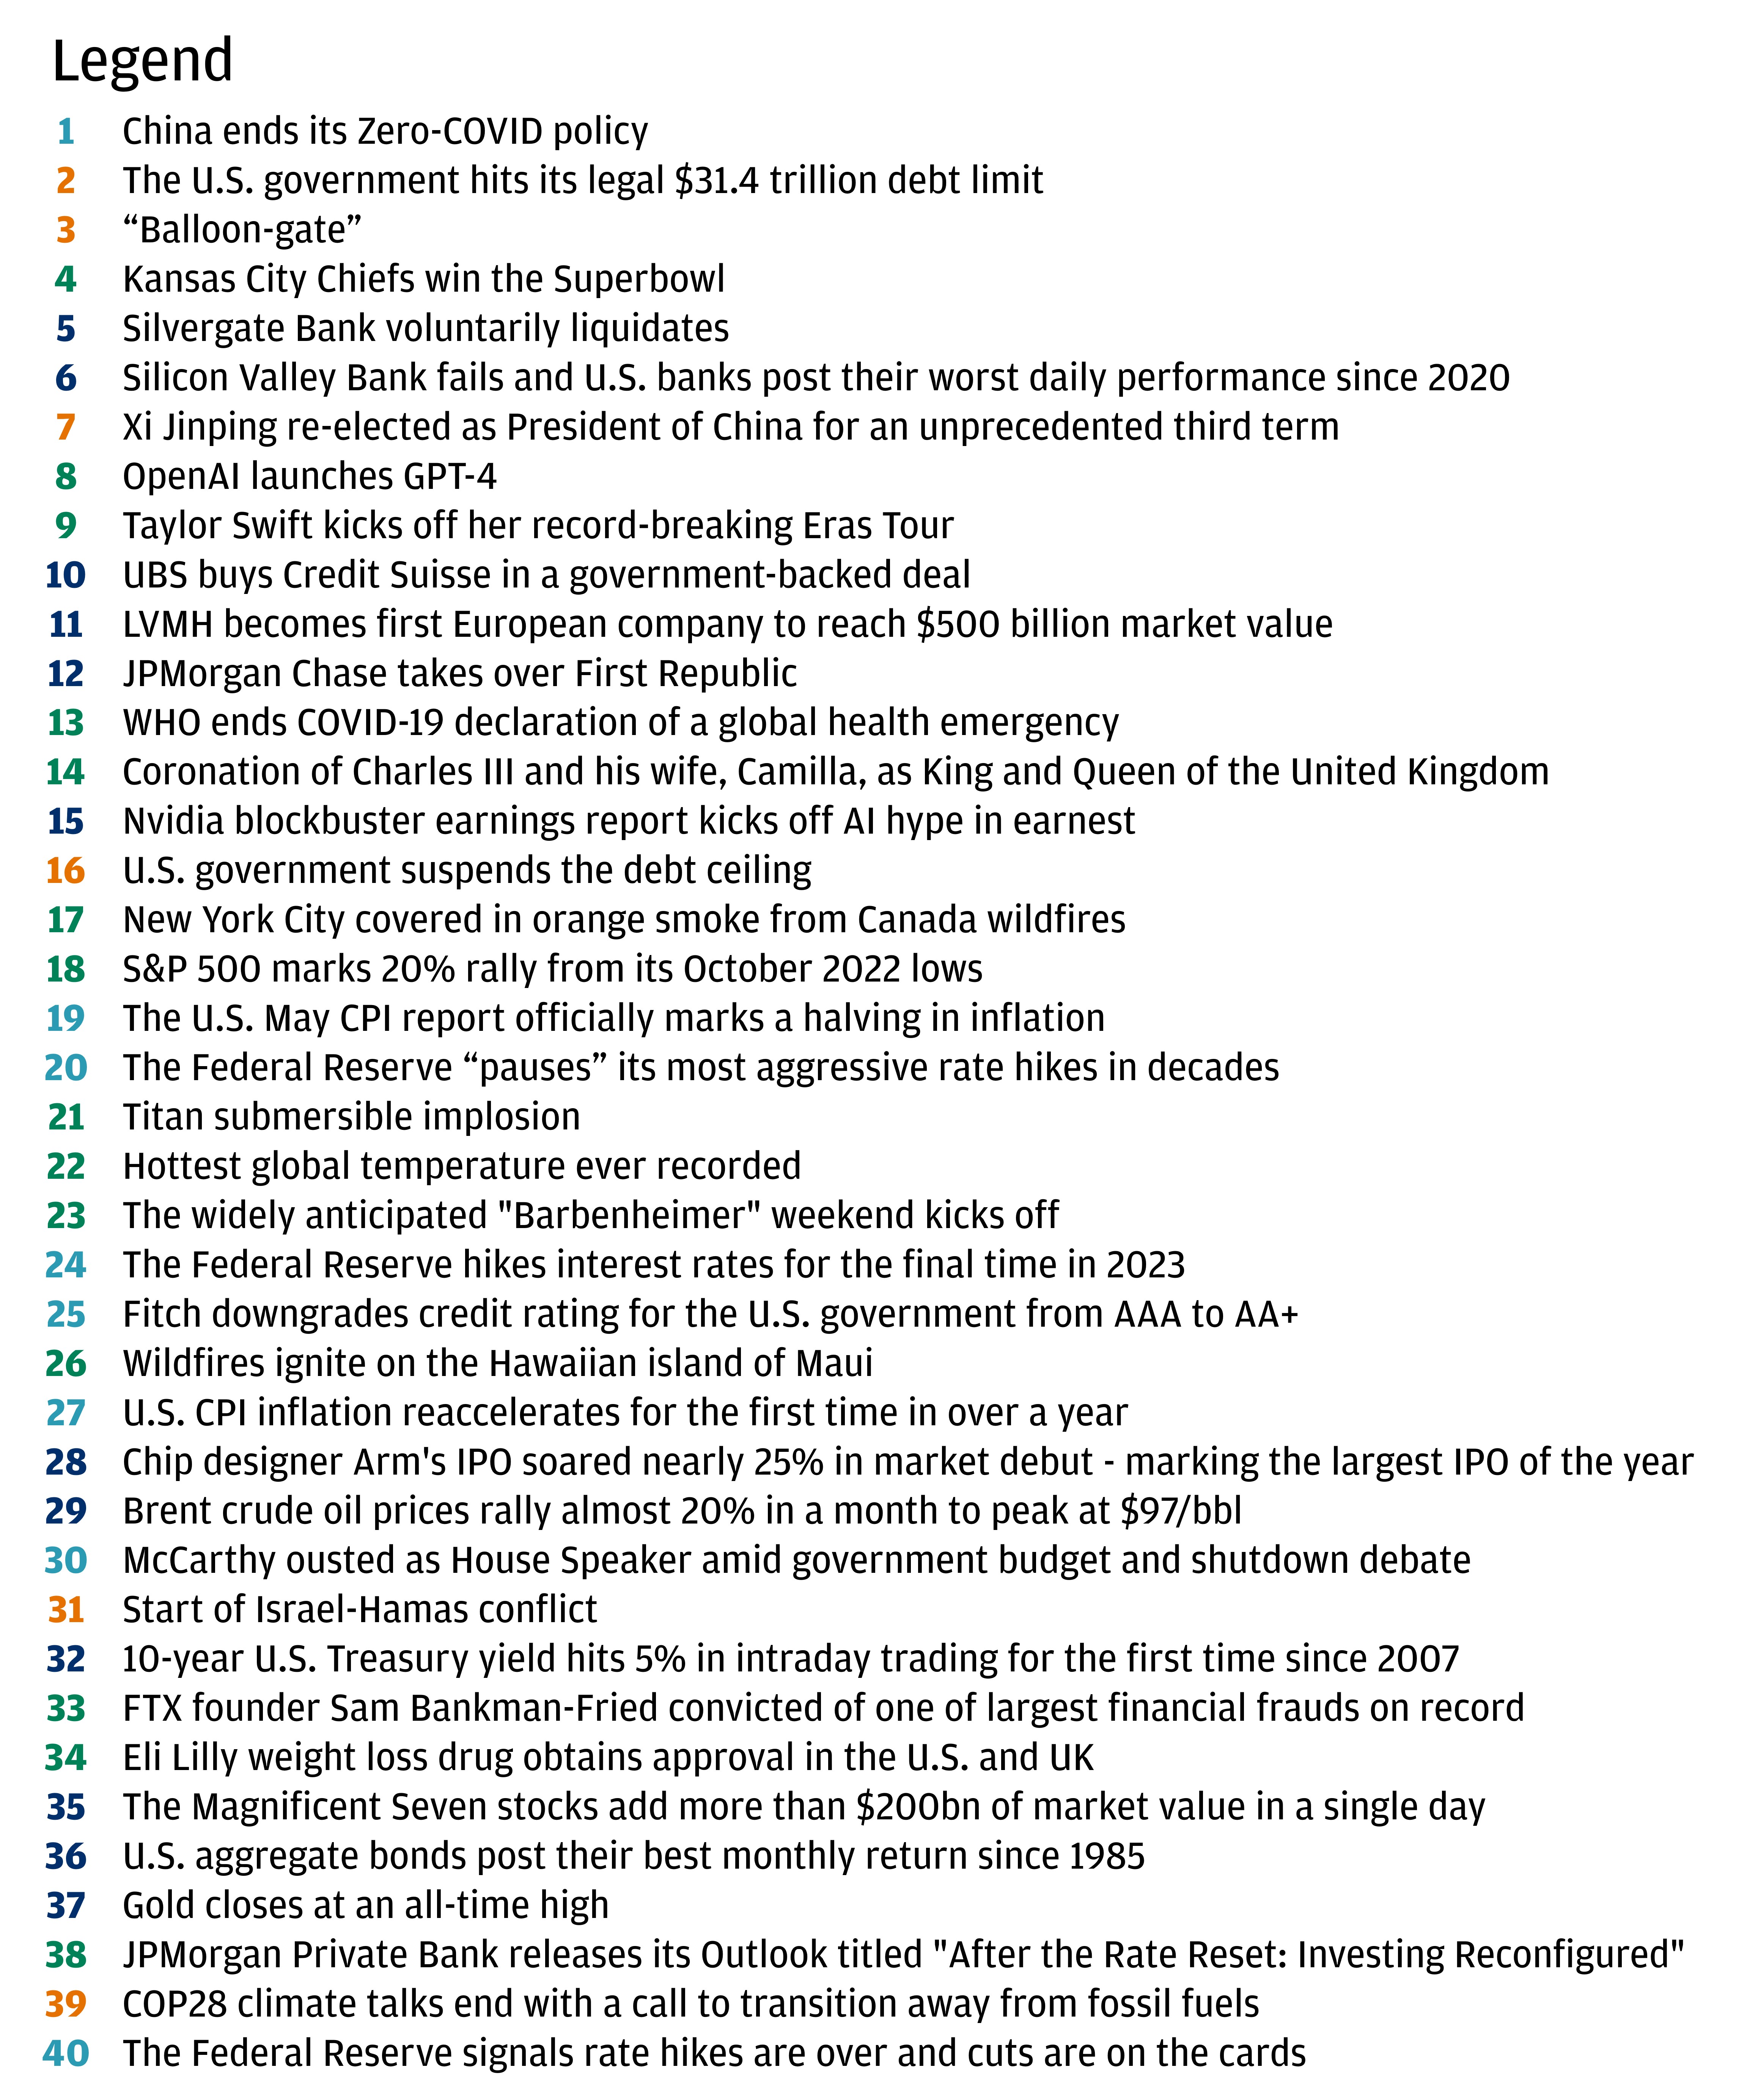 This table shows the 40 events that occurred between January 2023 and June 2023.